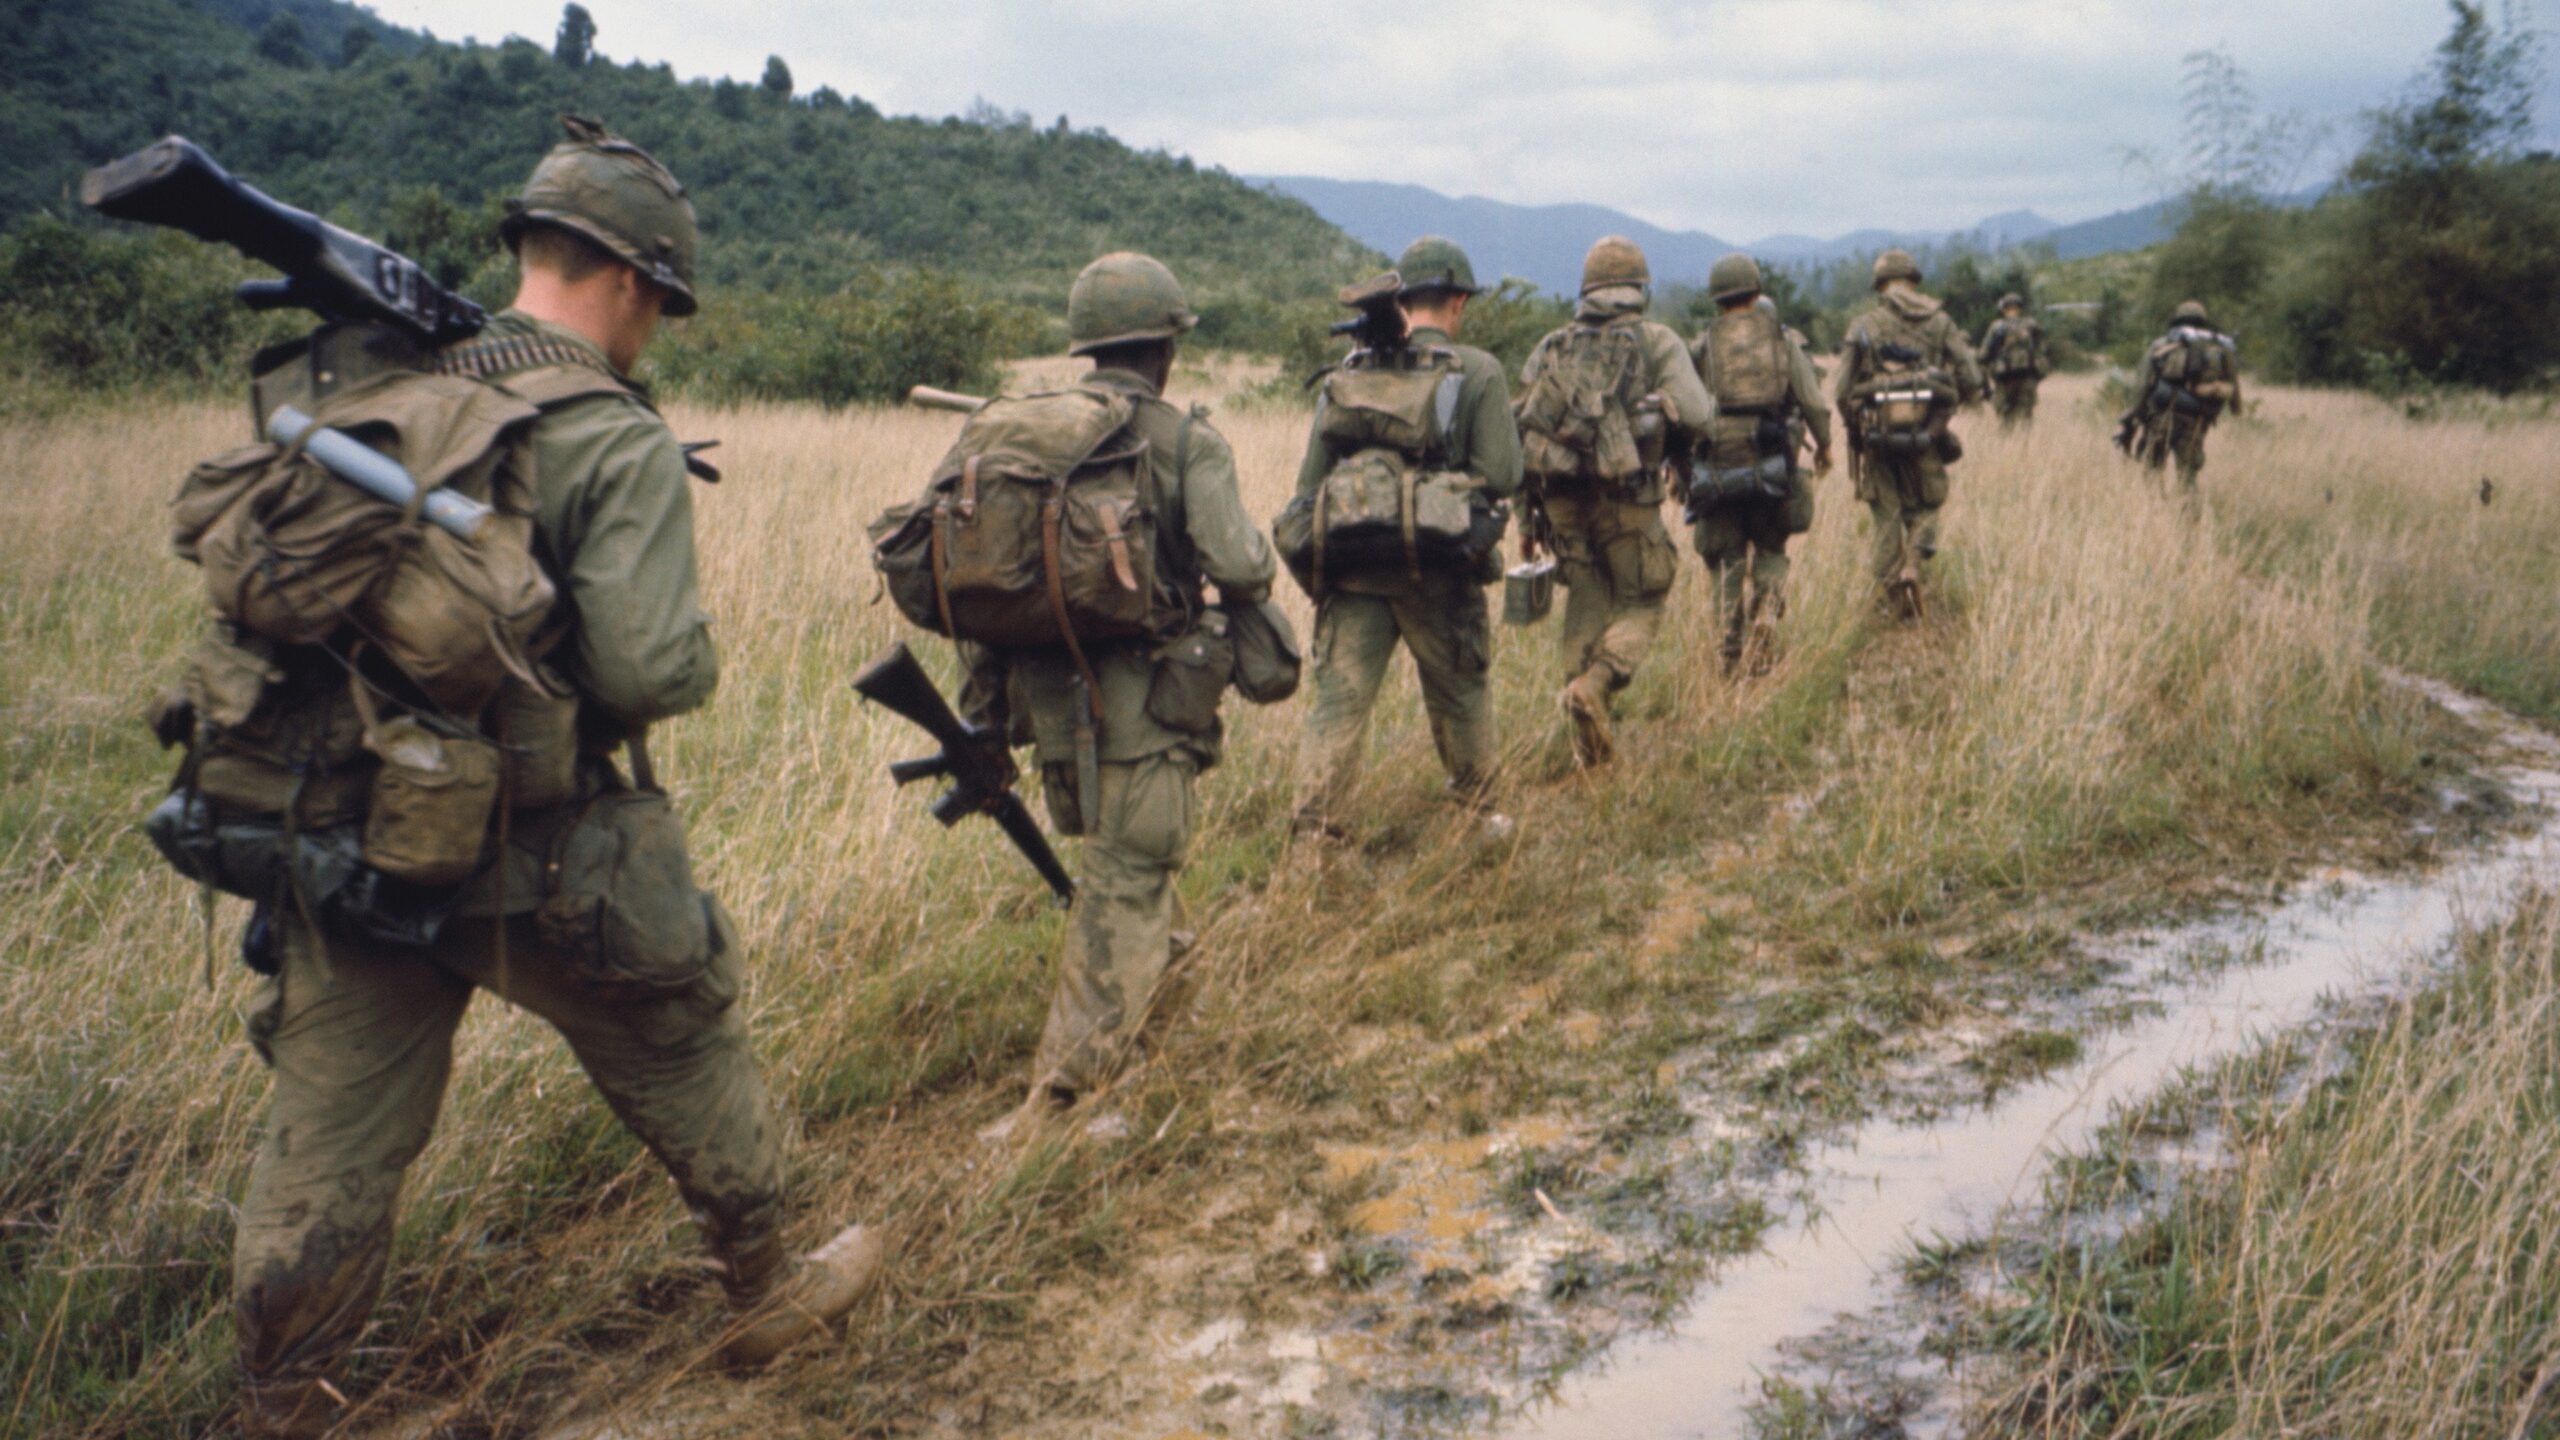 The Vietnam War, Band of Brothers